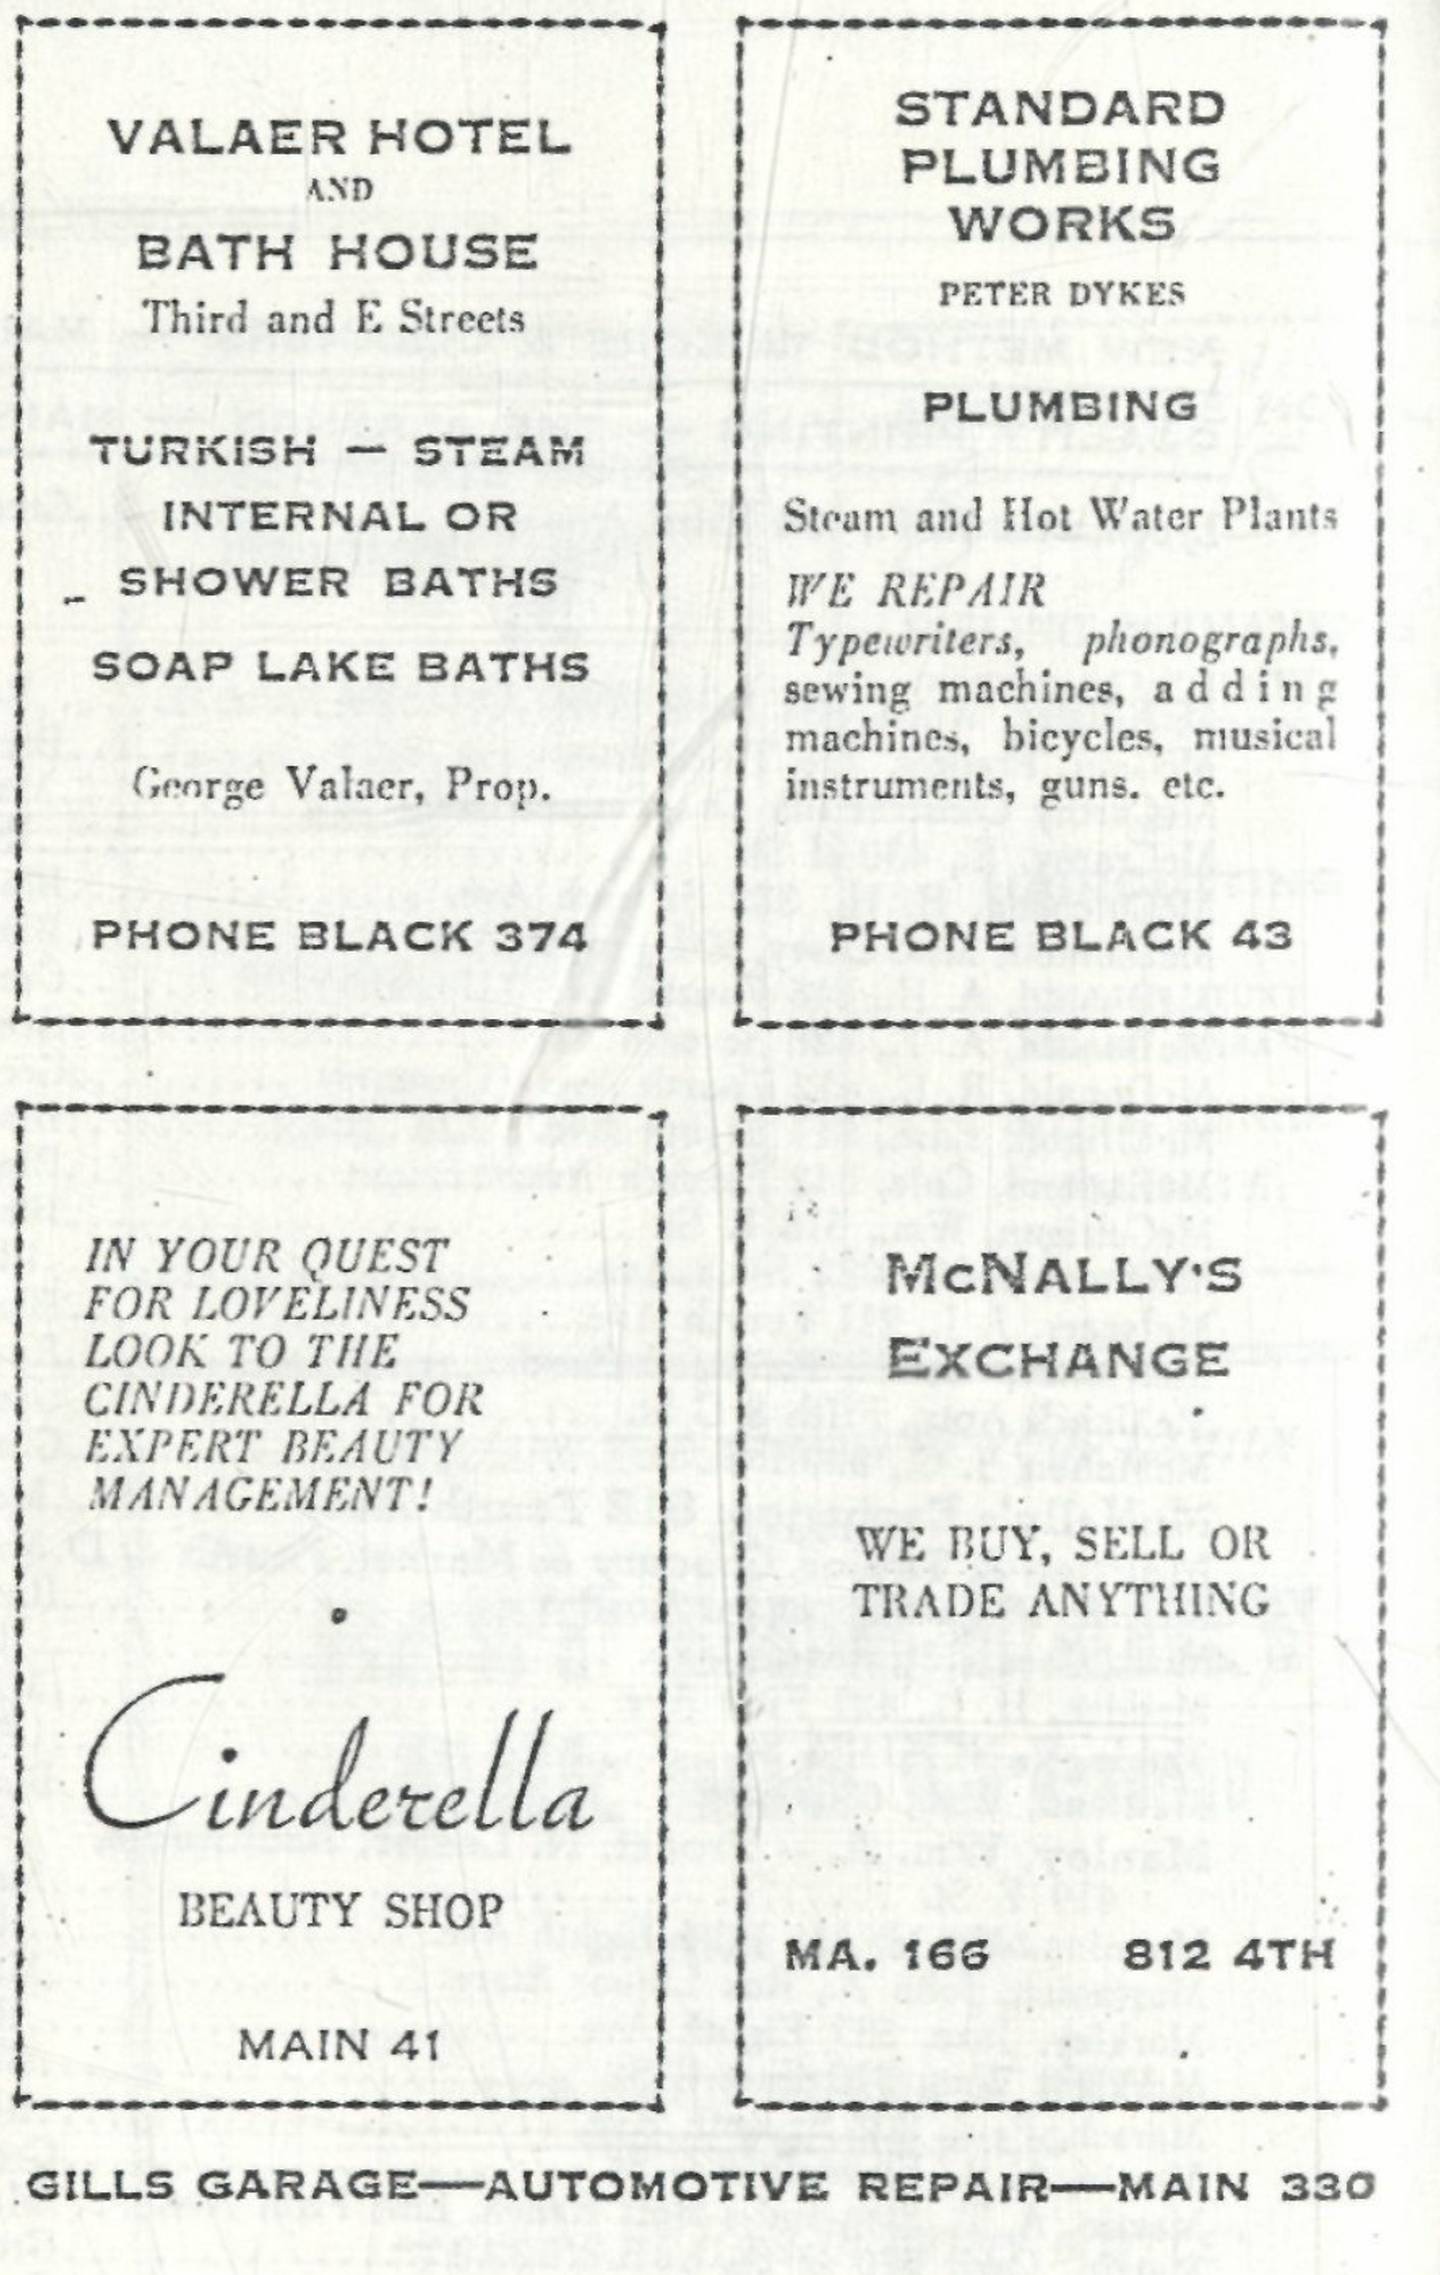 Advertisements from the 1939 Anchorage phone book